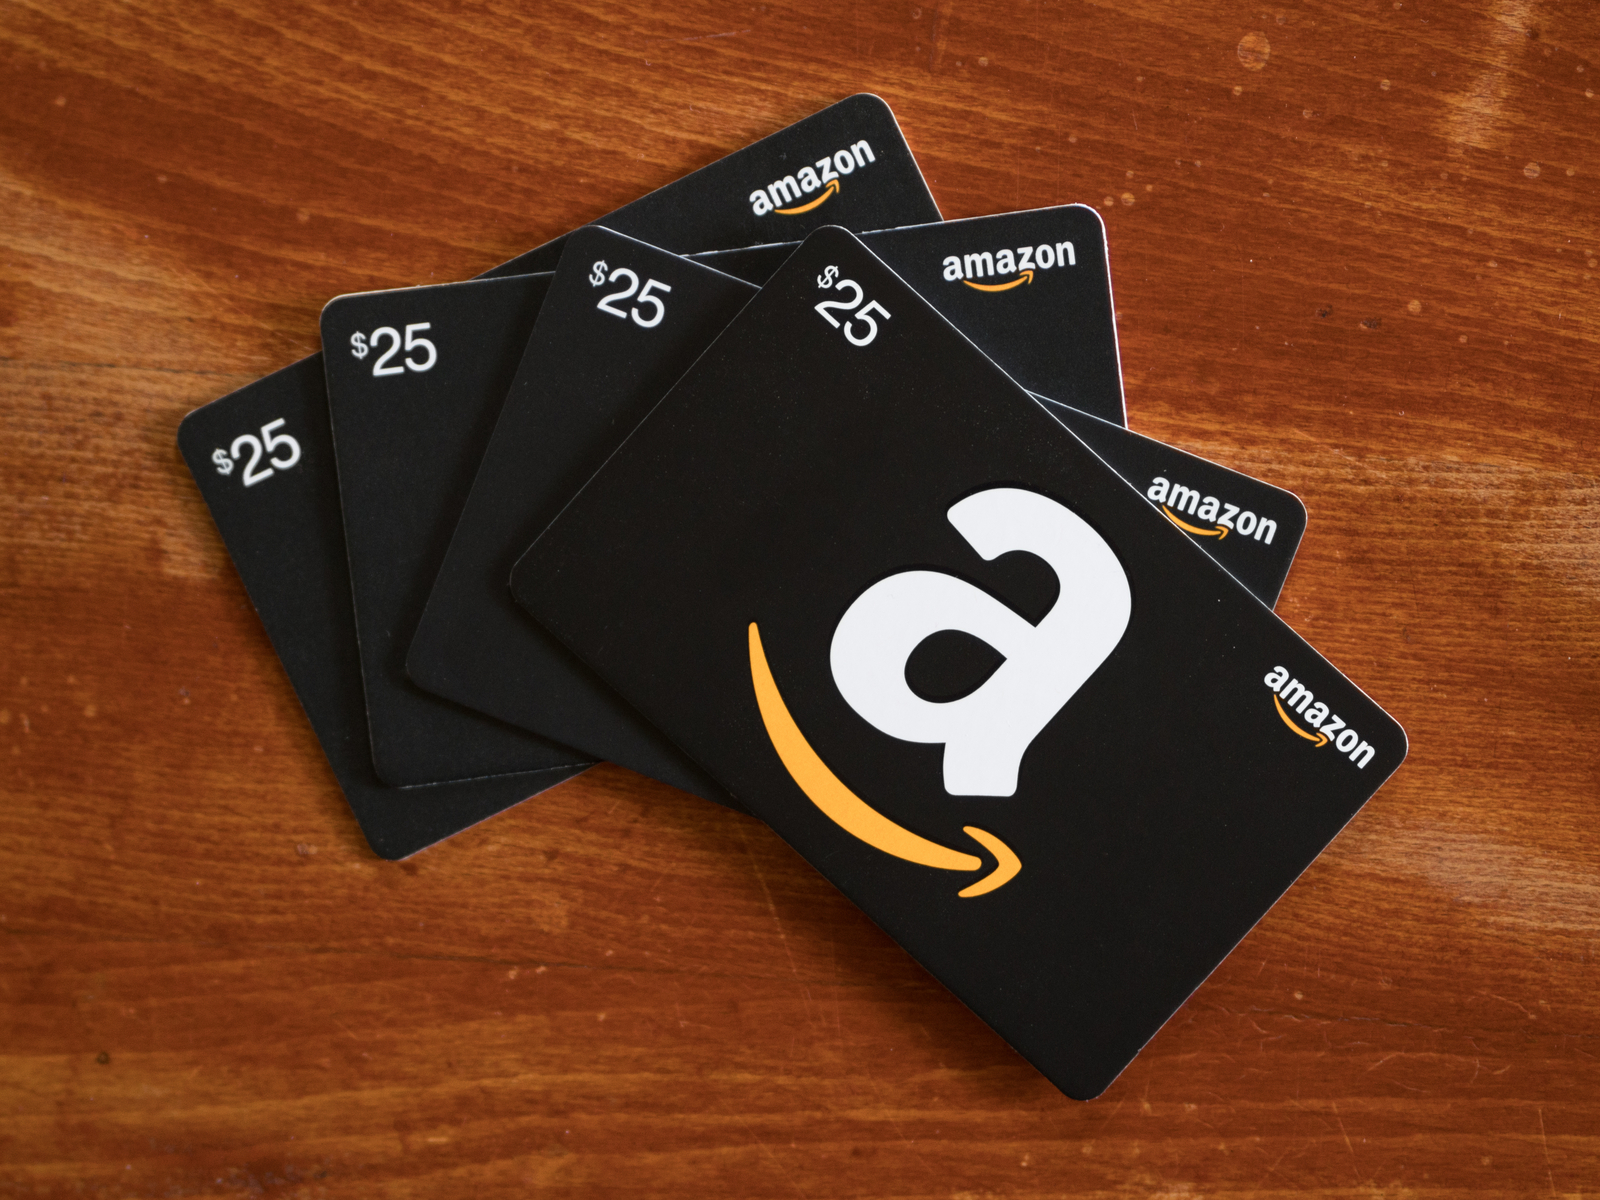 Btc for amazon gift card is coinbase regulated